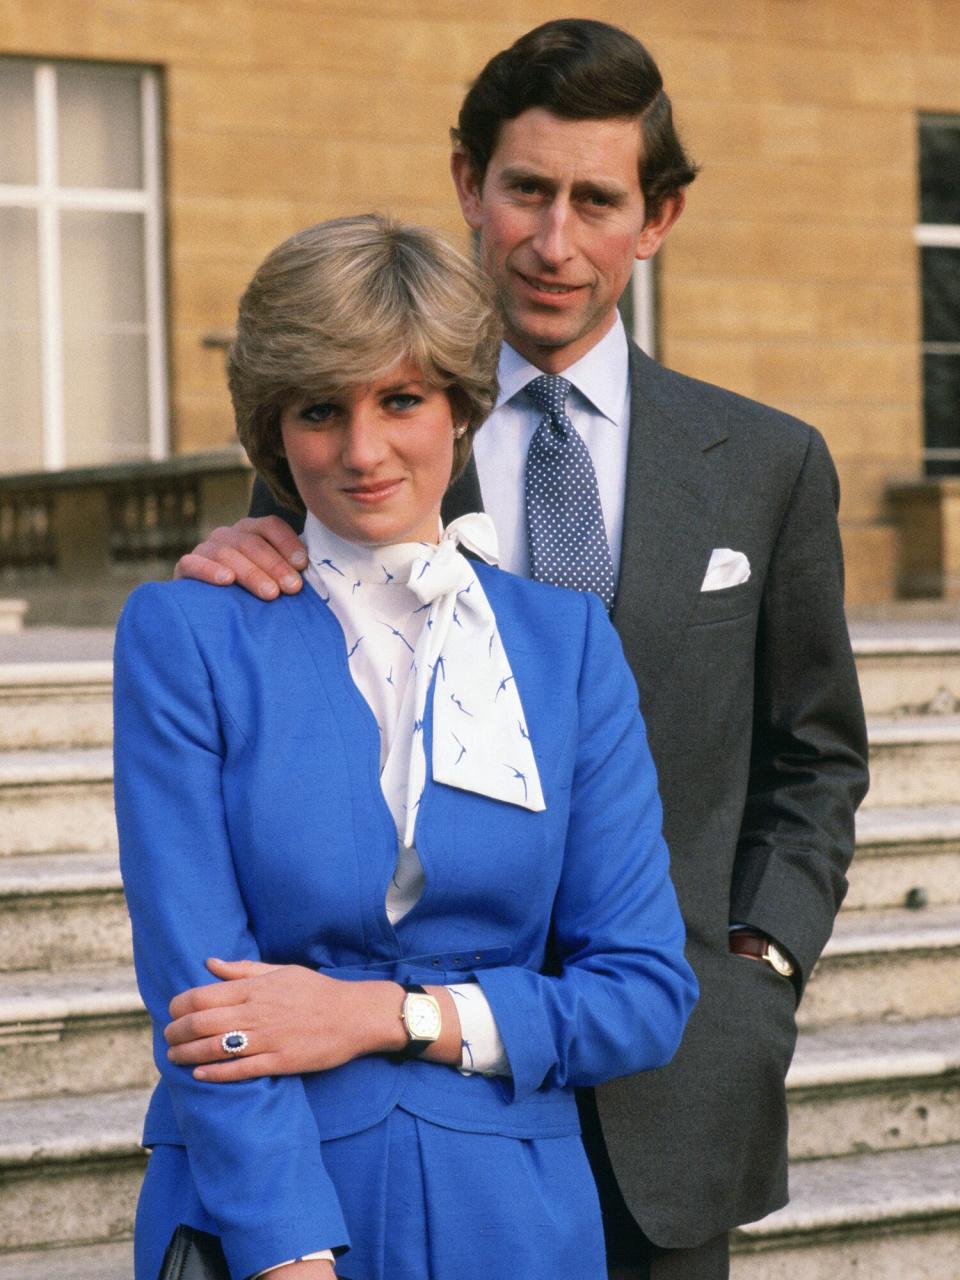 Lady Diana Spencer (later to become Princess of Wales) reveals her sapphire and diamond engagement ring while she and Prince Charles, Prince of Wales pose for photographs in the grounds of Buckingham Palace following the announcement of their engagement